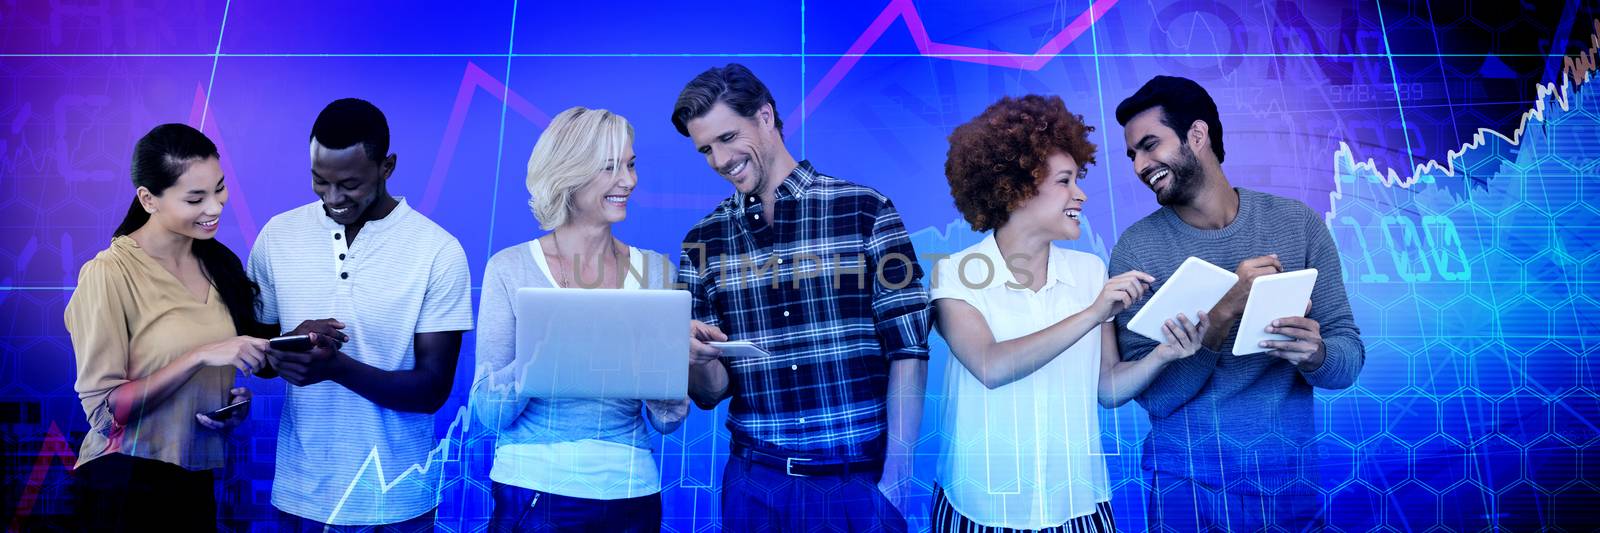 Smiling business people using technology against white background against high angle view of crowded buildings in city